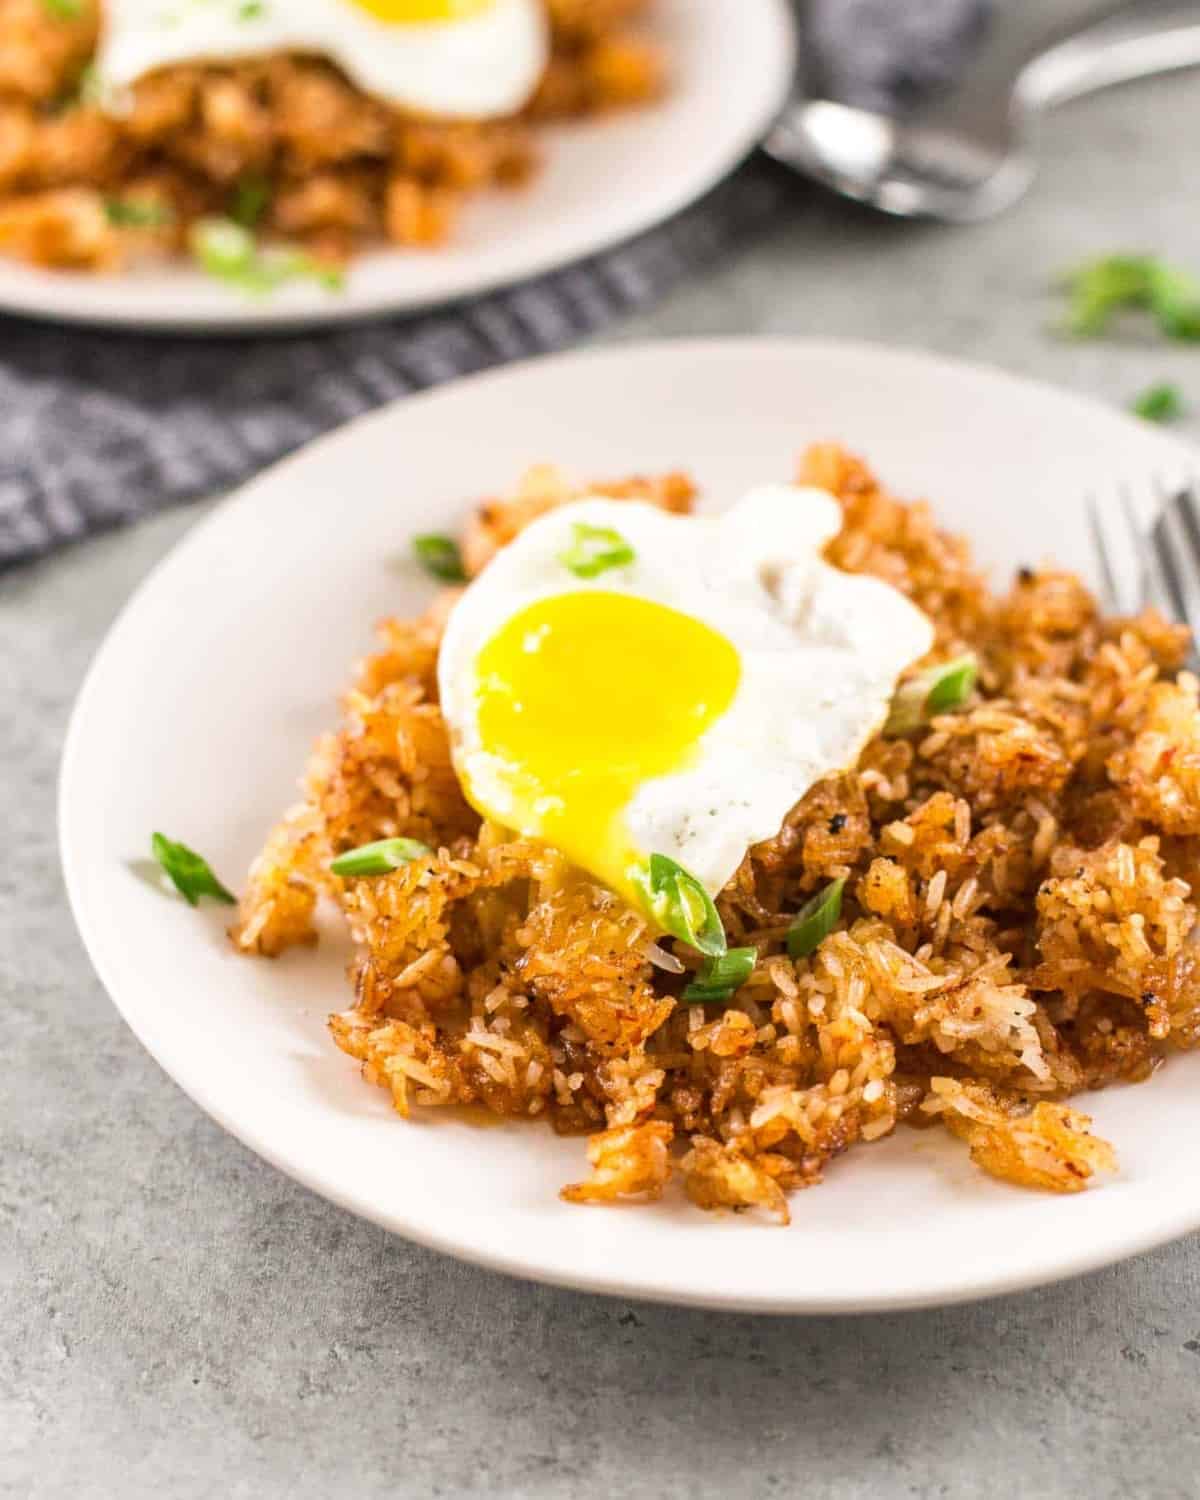 Thai Crispy Rice topped with a fried egg